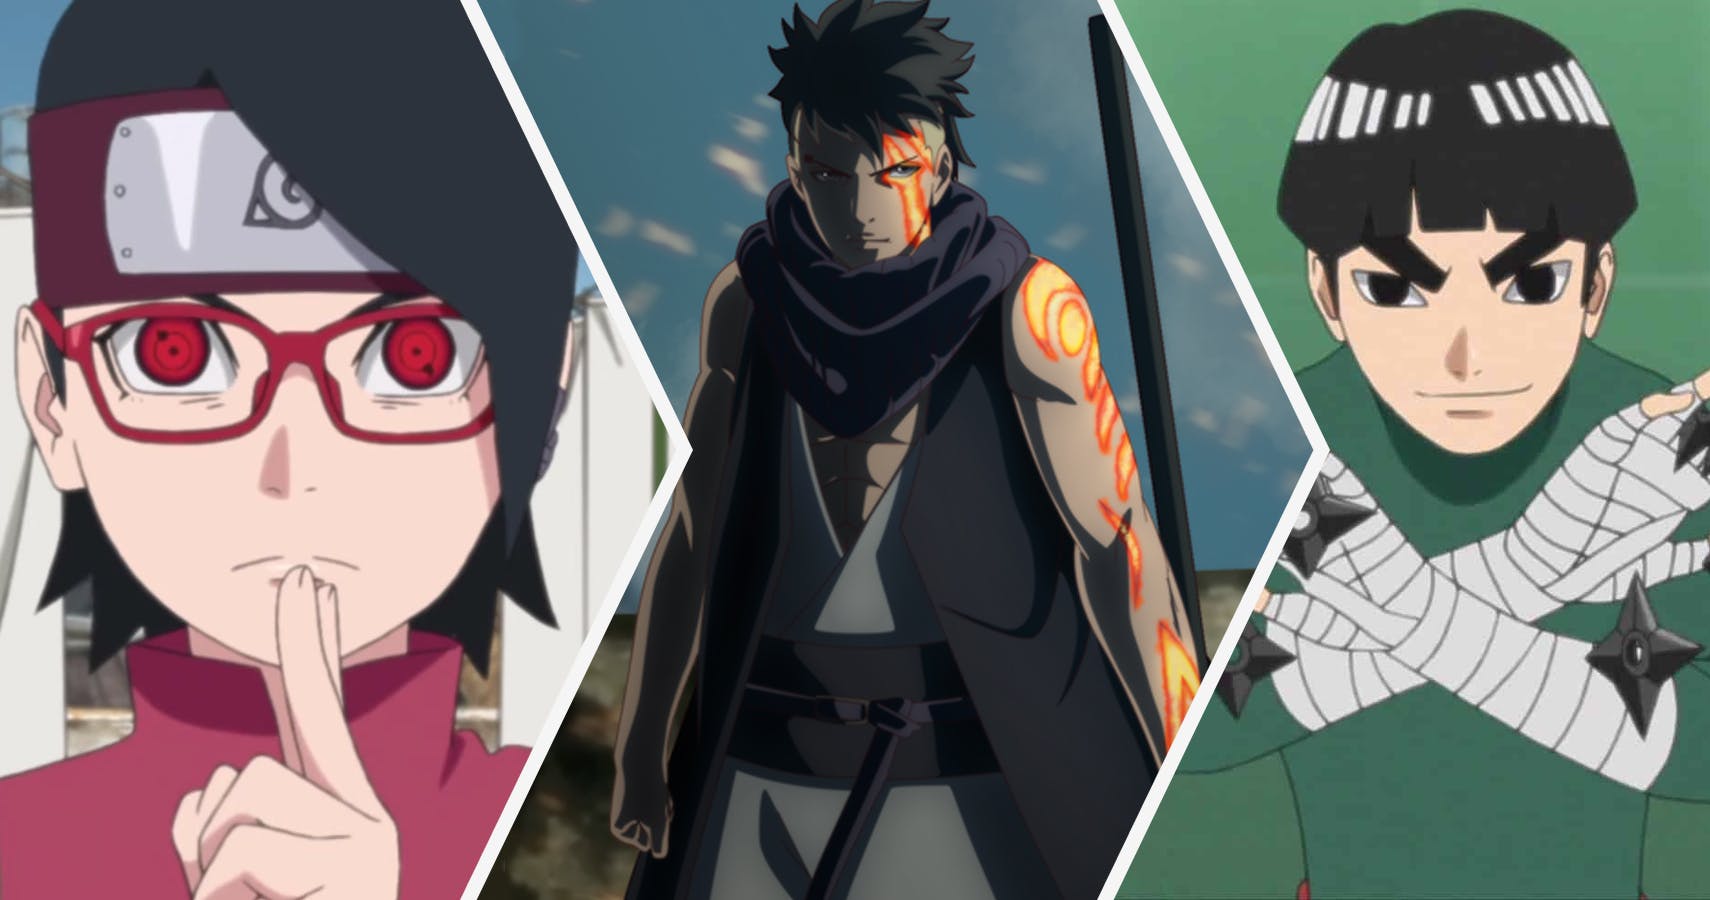 Boruto Anime Schedule For January - February 2019! New Arc Starting